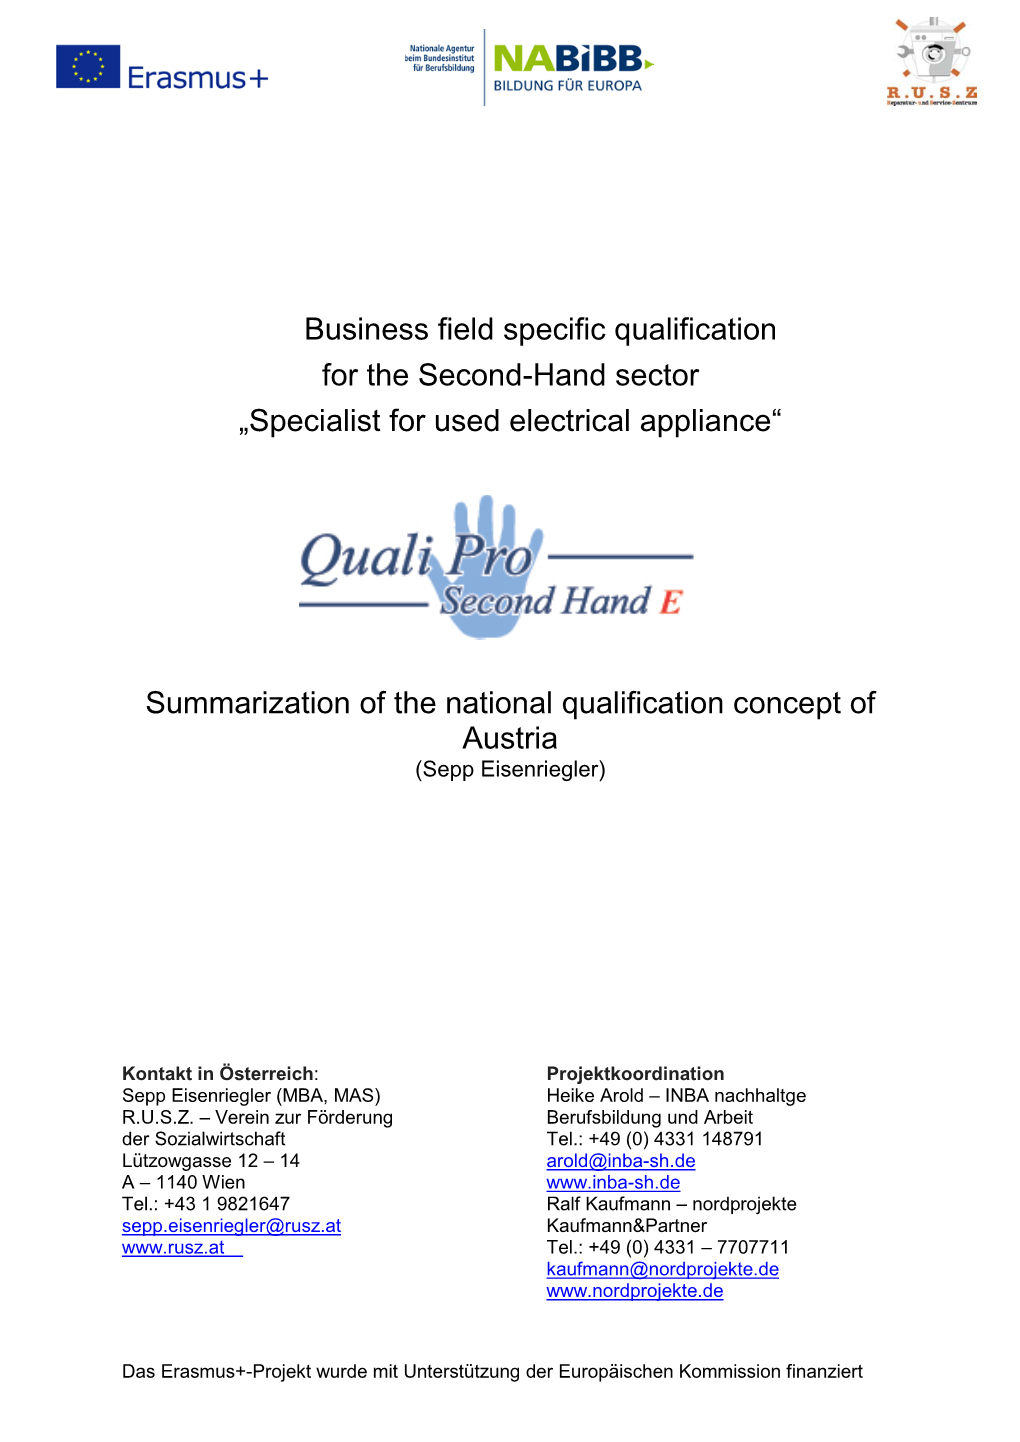 Business Field Specific Qualification for the Second-Hand Sector „Specialist for Used Electrical Appliance“